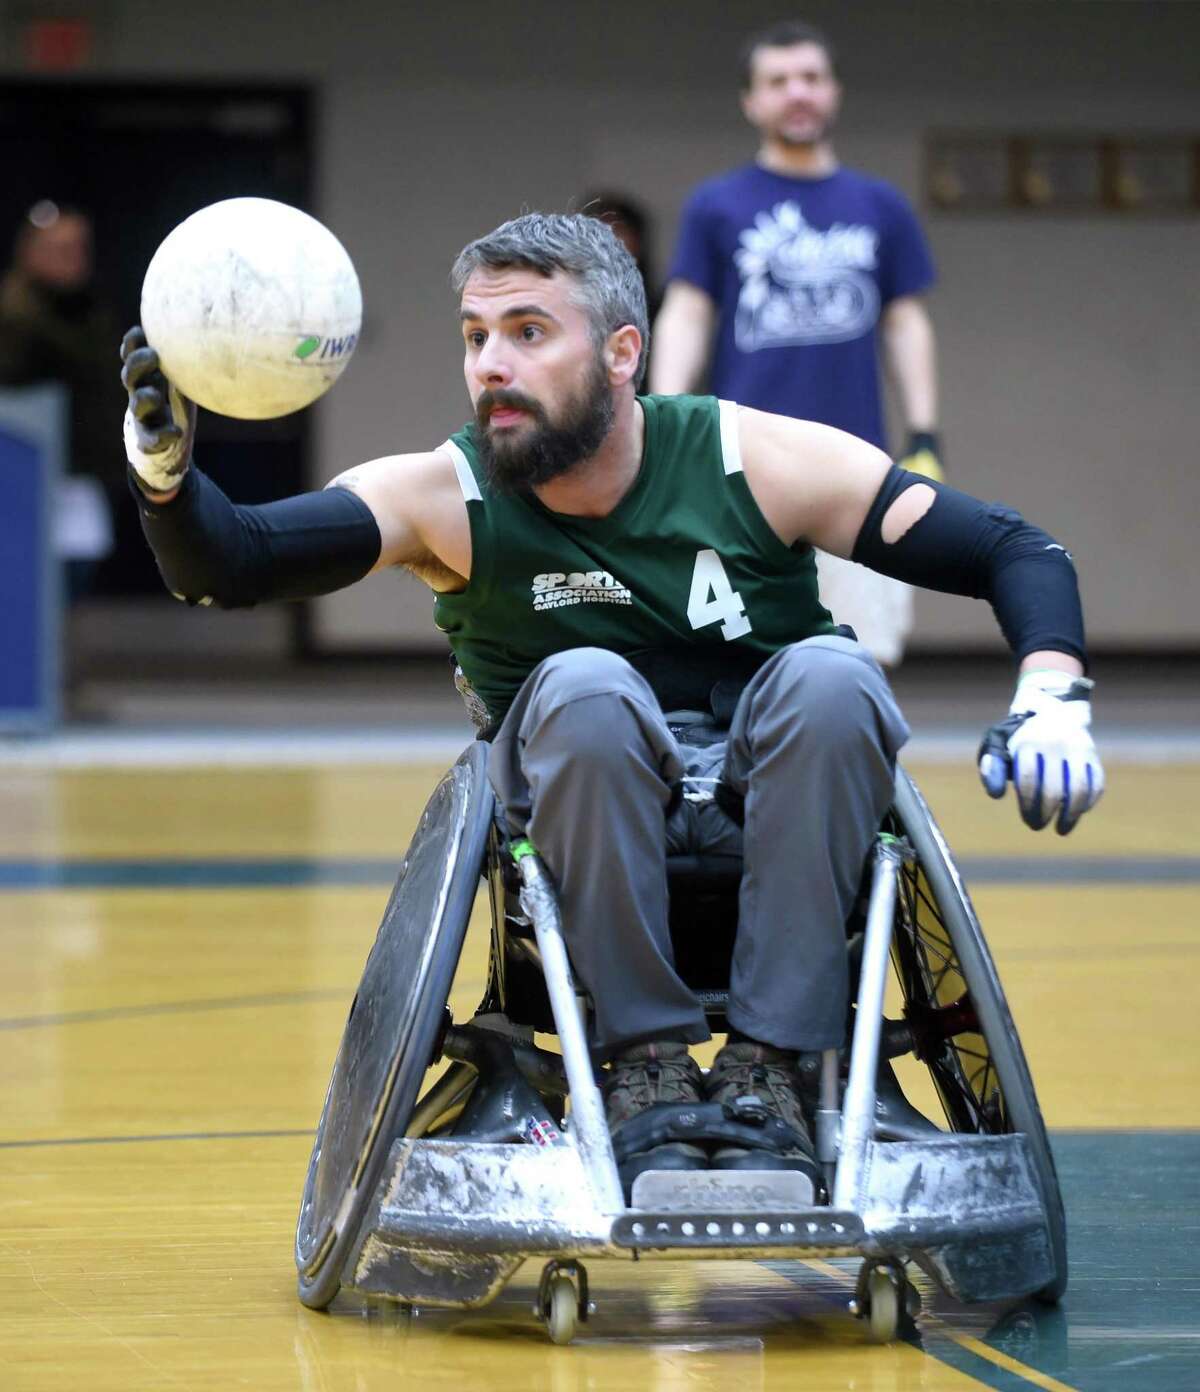 Brett Smith of the Connecticut Jammers Quad Rugby Team catches a pass during a wheelchair rugby demonstration and clinic at the Adaptive Sports Fest at Southern Connecticut State University’s Moore Field House in New Haven on Saturday.